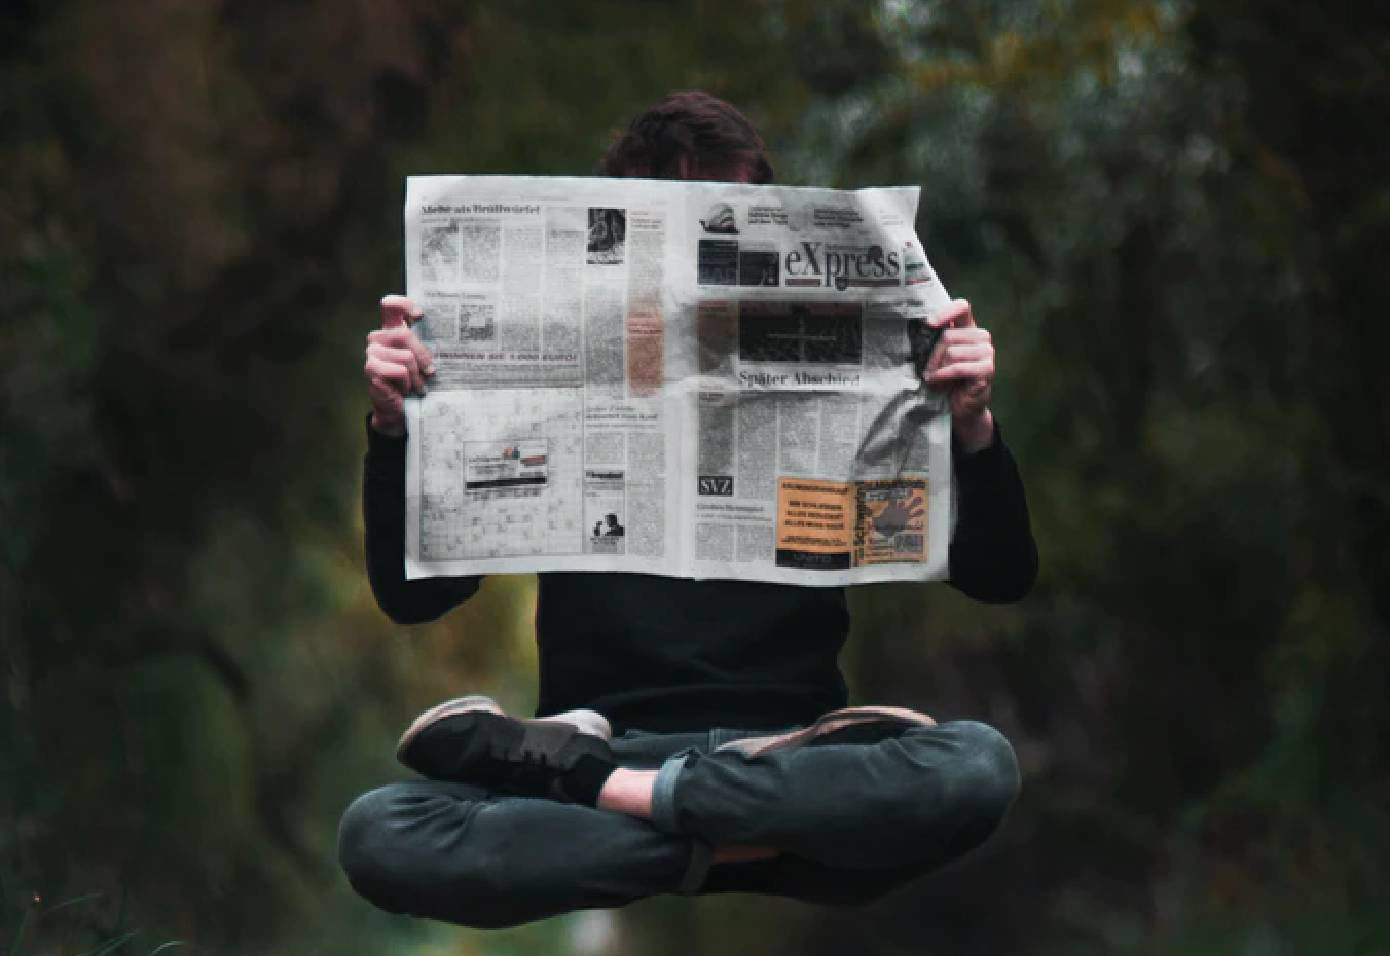 A man reading a newspaper while floating in the air with his legs crossed